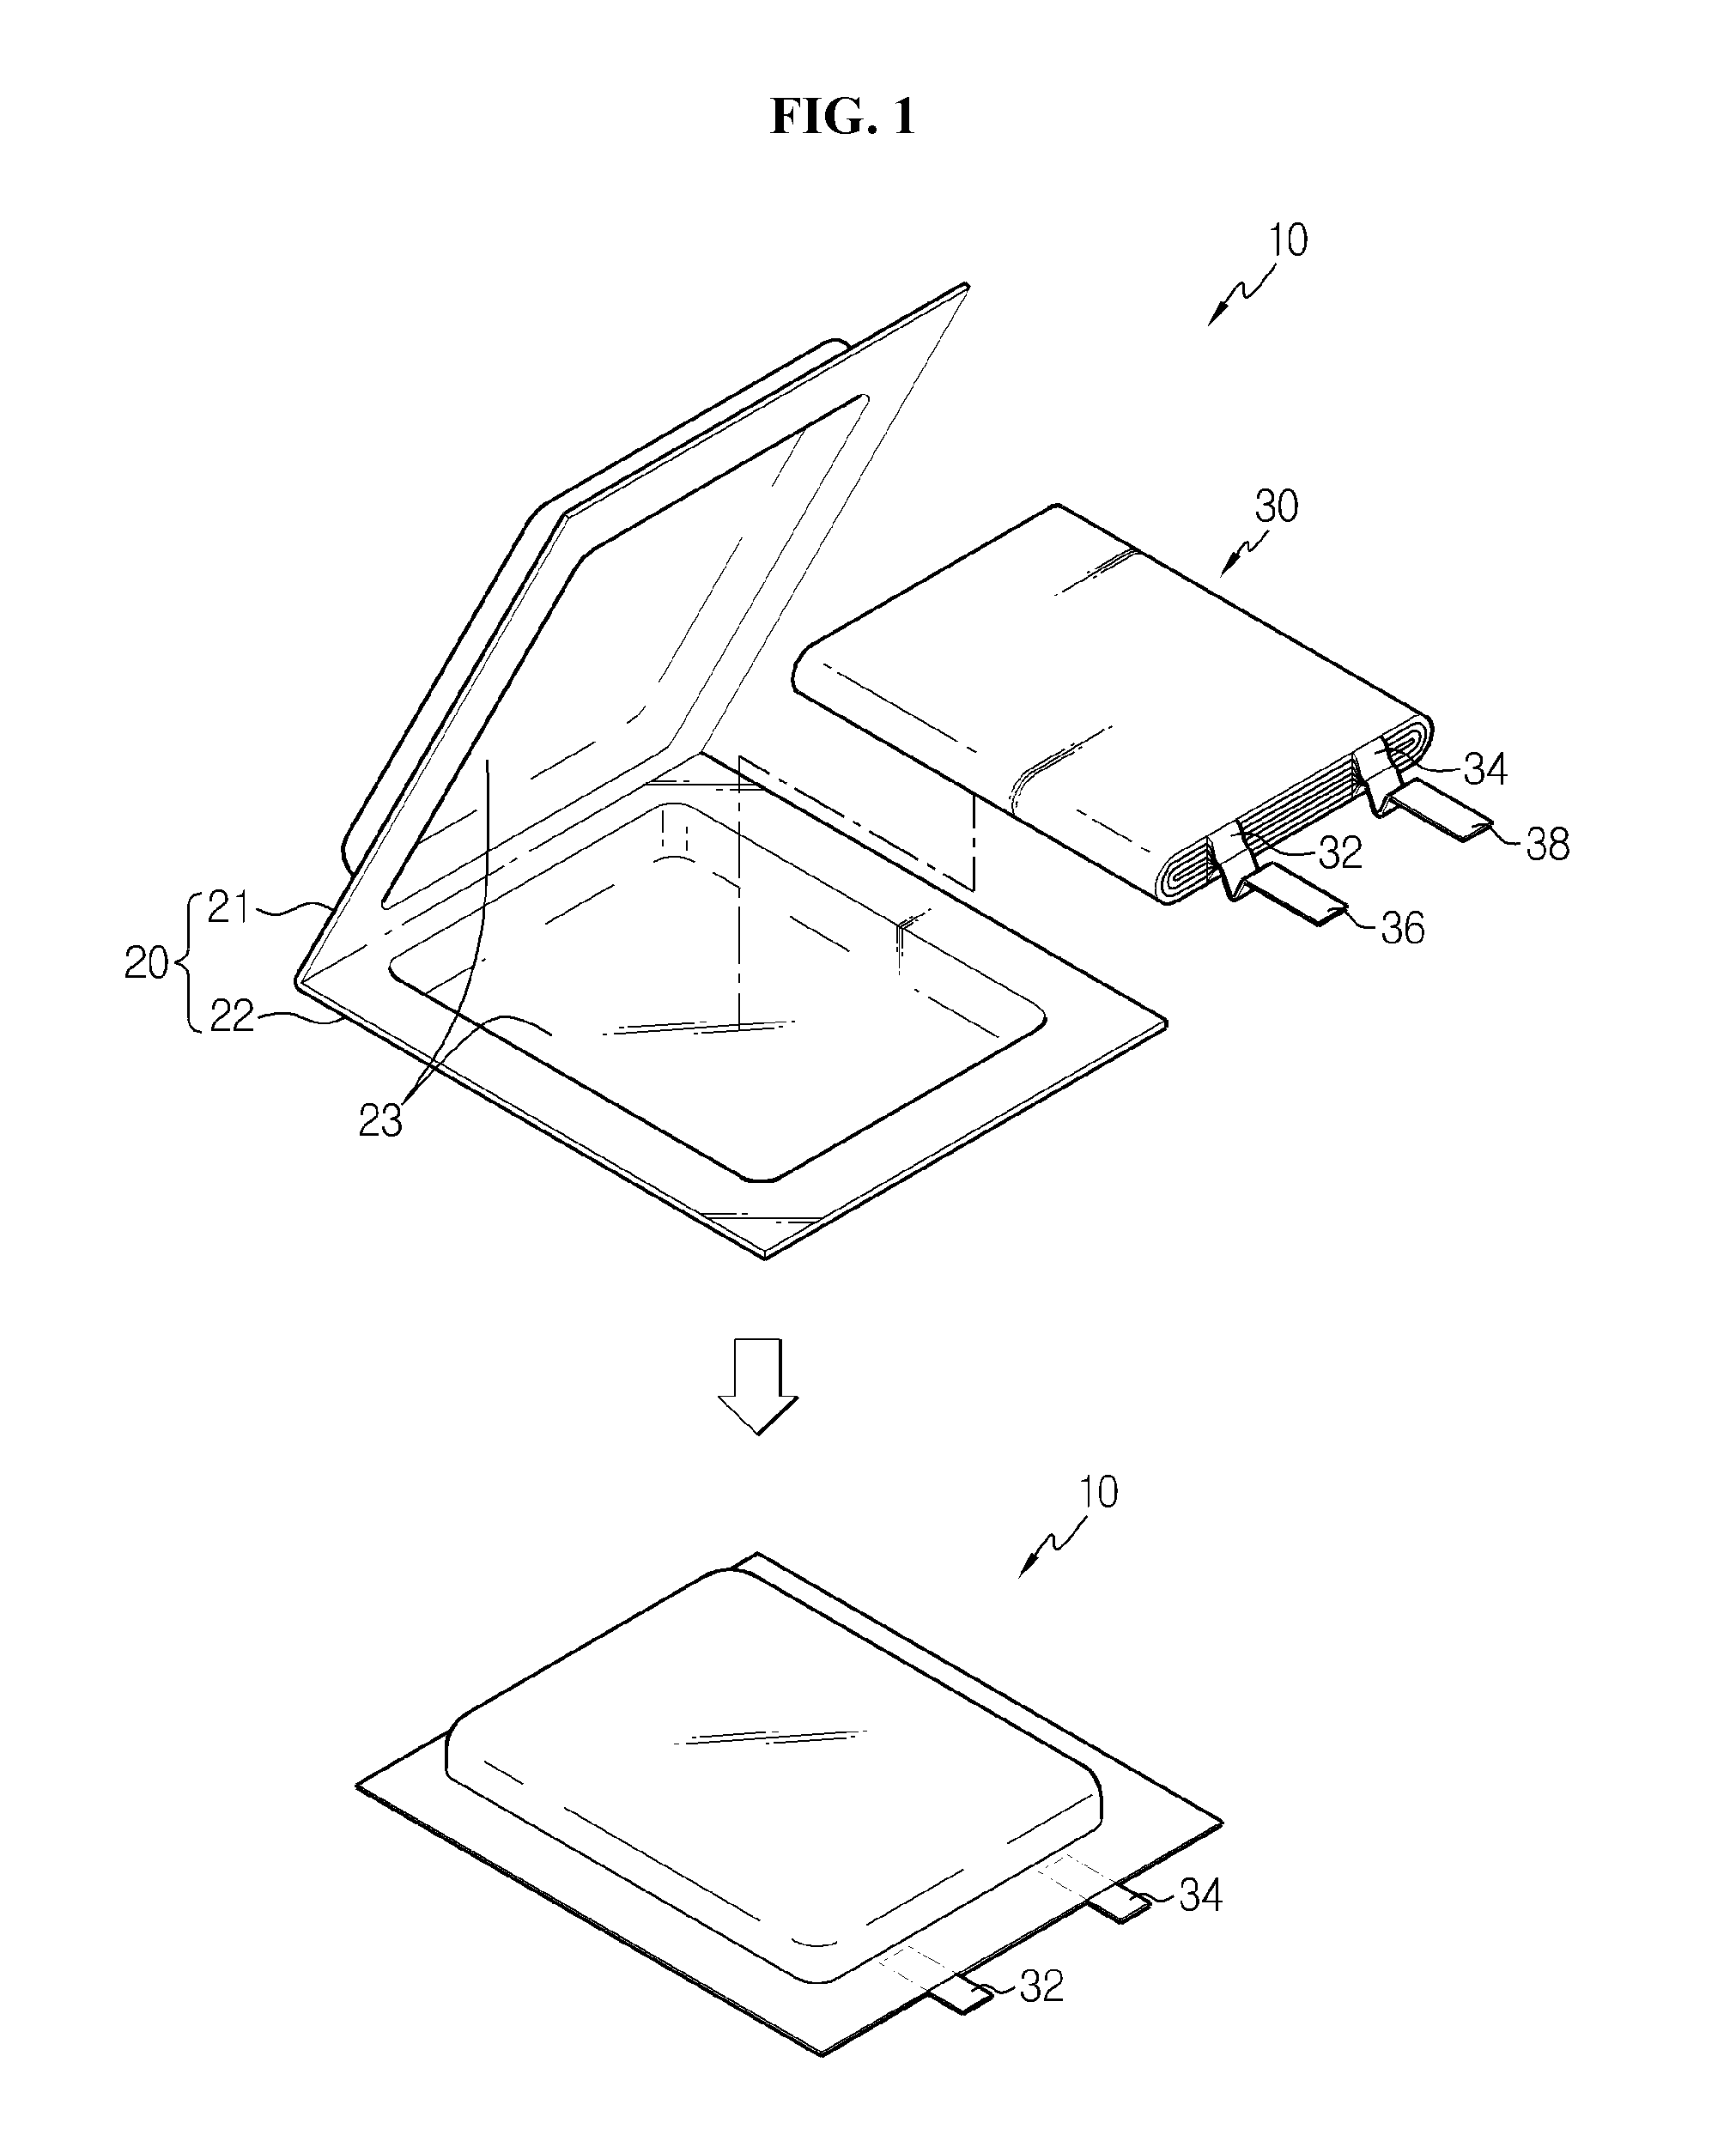 Secondary battery of differential lead structure